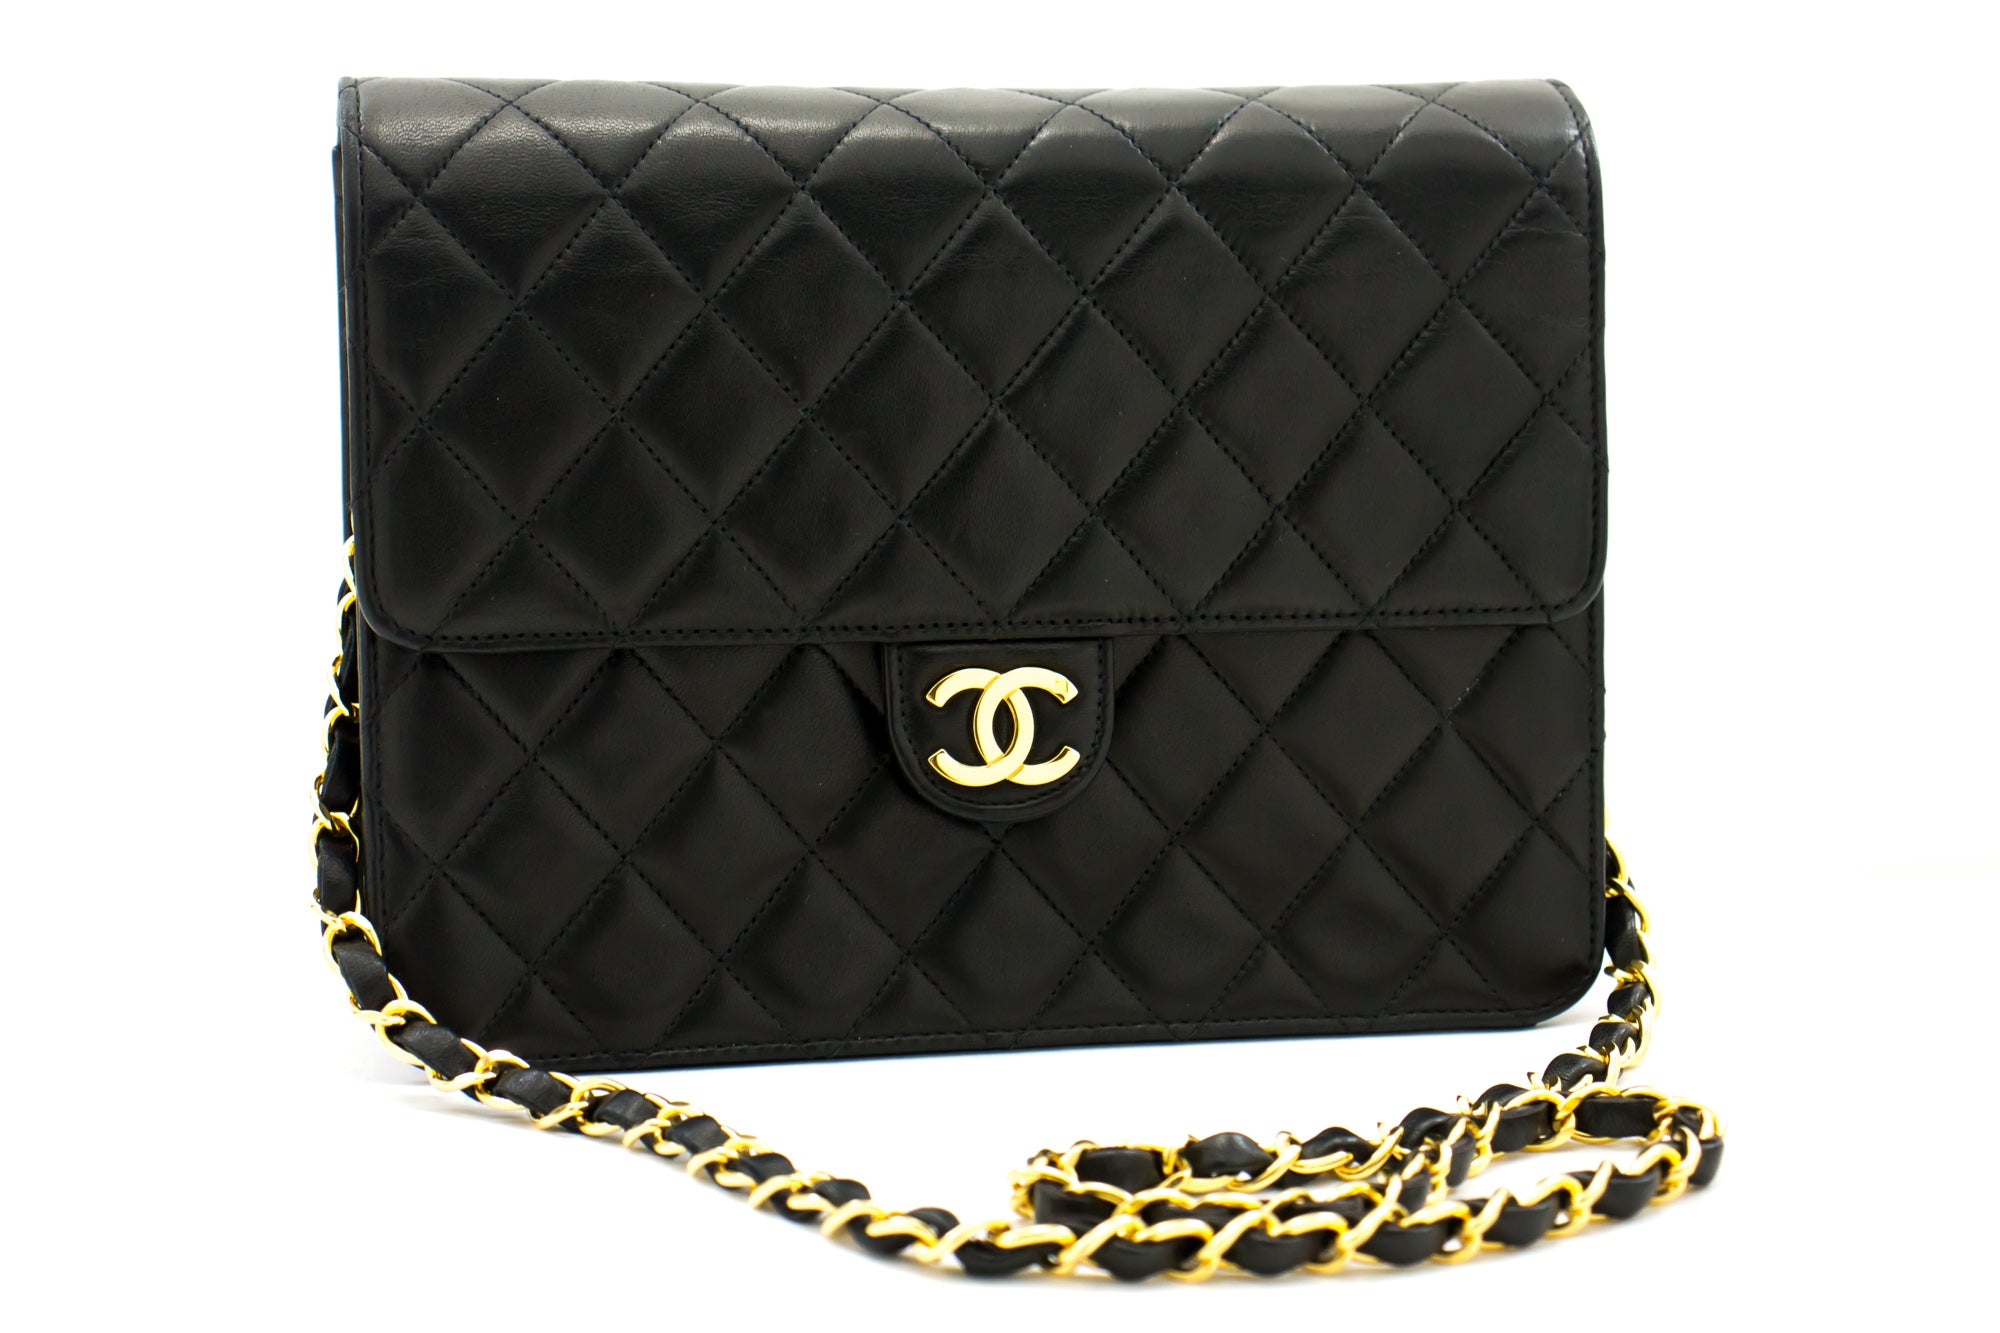 Authentic CHANEL Handbags for Sale - Bing - Shopping